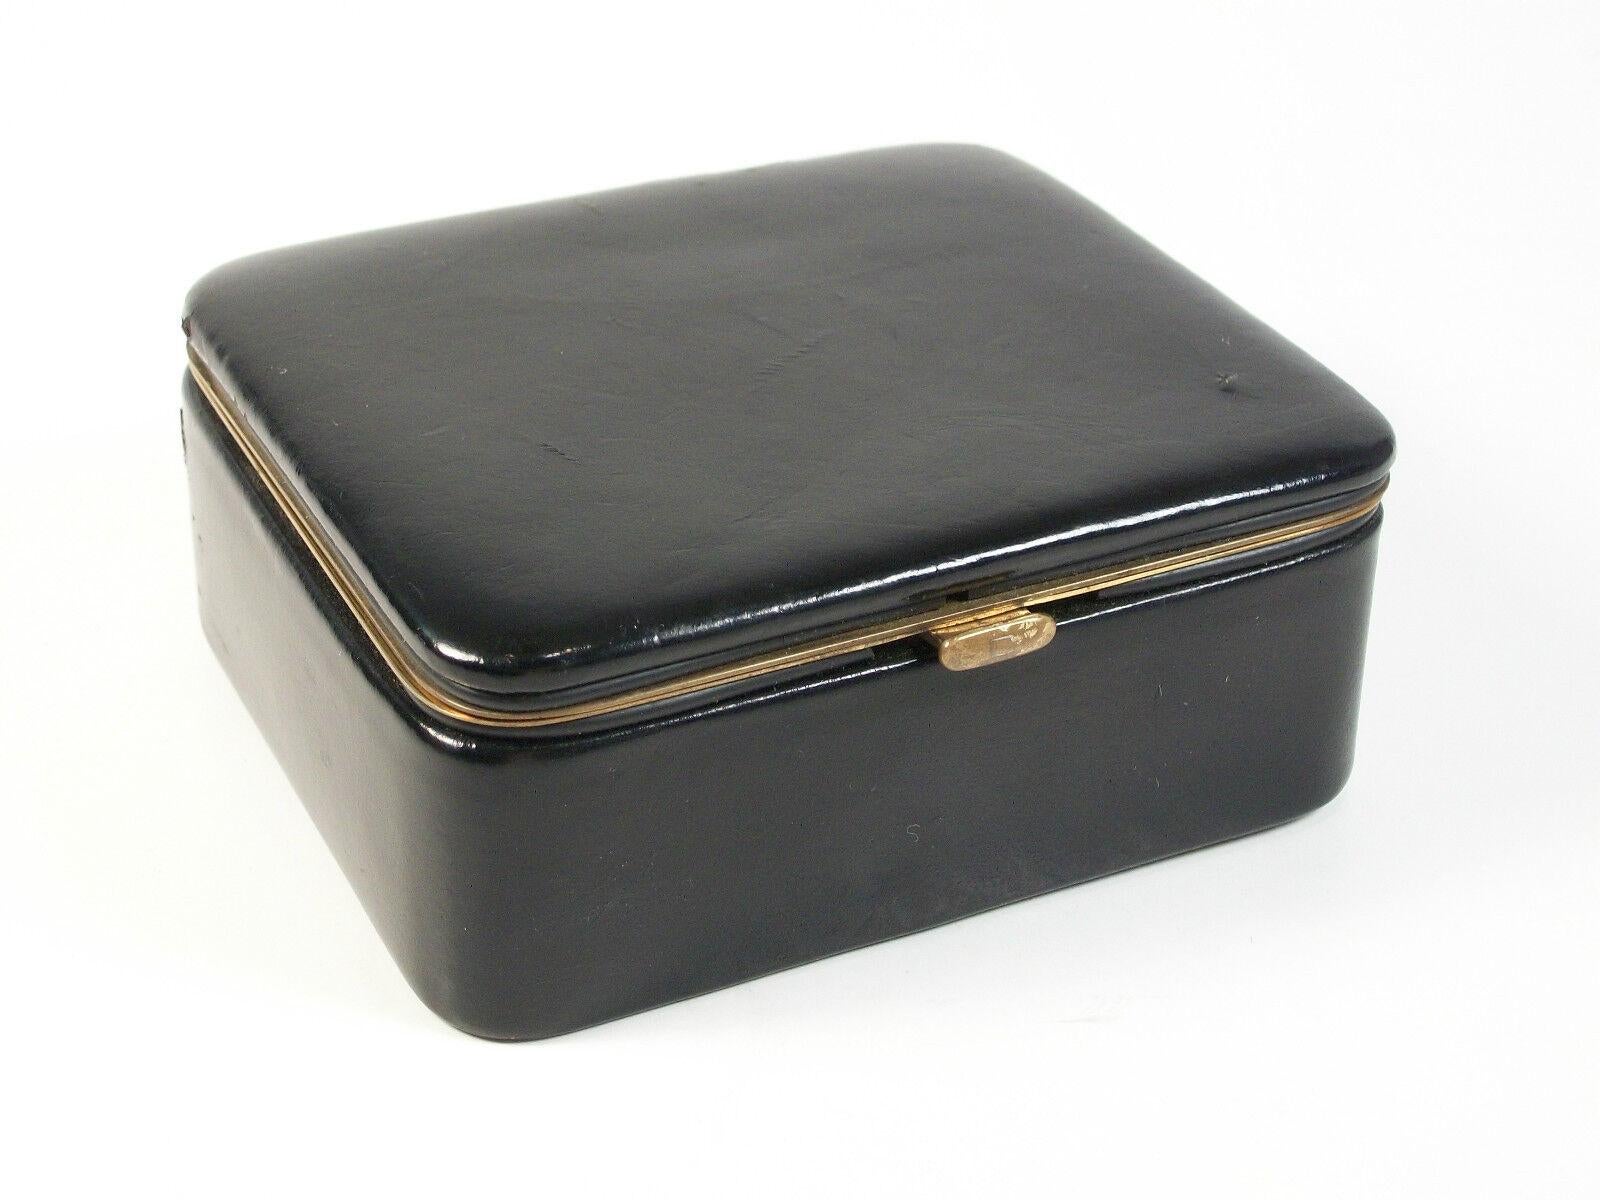 Mid Century - finest quality - genuine kid leather jewelry box/organizer with hinged lid - polished brass details - soft natural suede interior - unsigned - marked in gold letters on the base - MADE IN WEST GERMANY - circa 1960's.  

Excellent